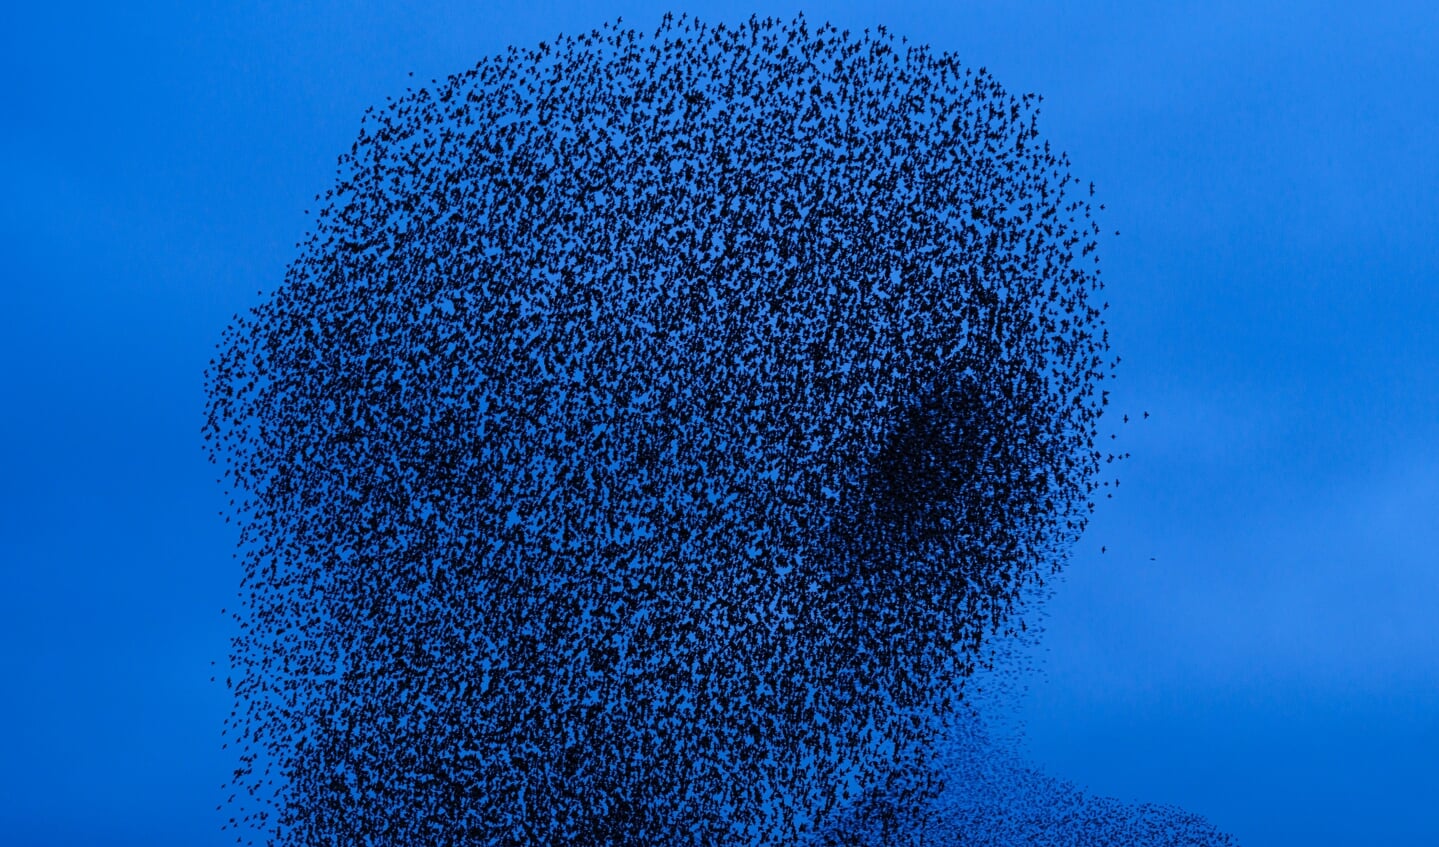 From the series Murmurations